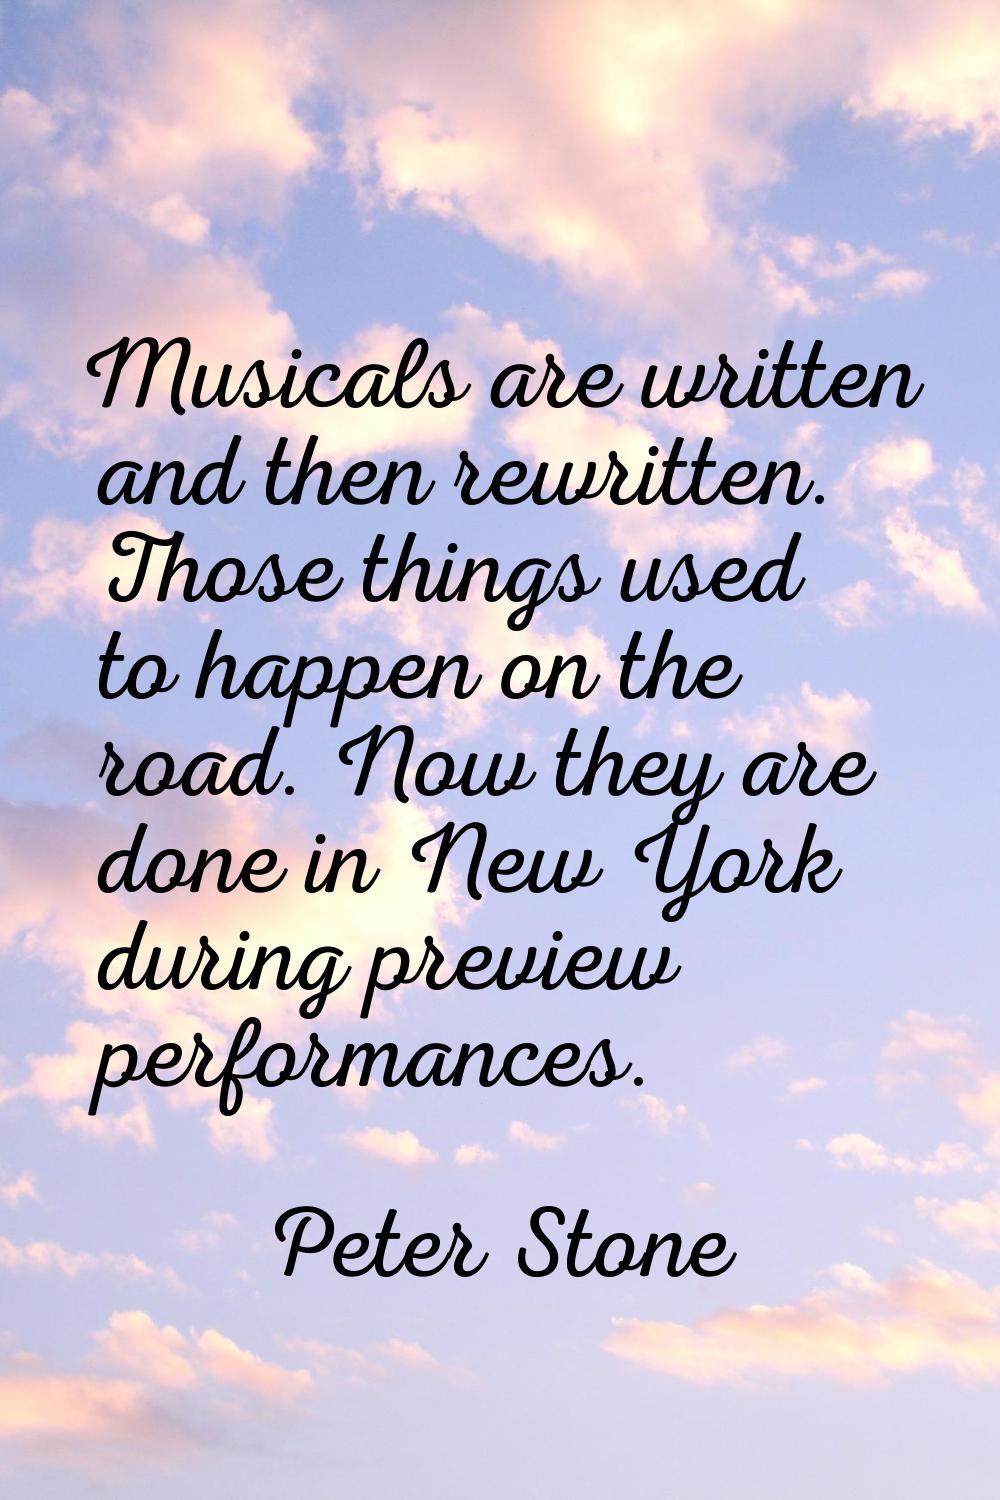 Musicals are written and then rewritten. Those things used to happen on the road. Now they are done